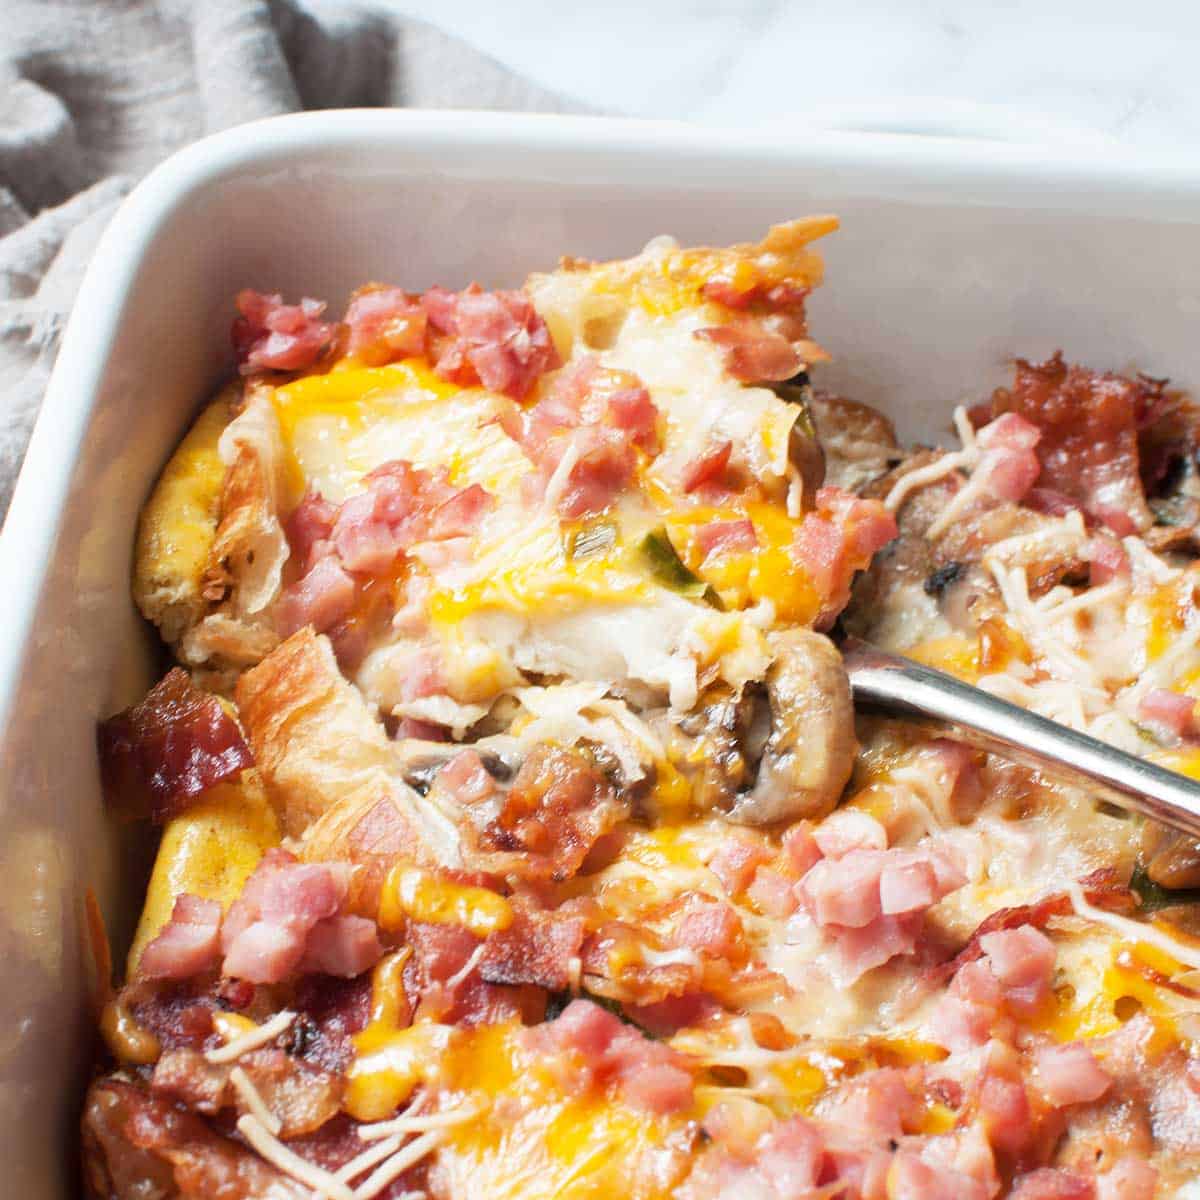 an image of a breakfast casserole (croissants, cheese, ham, bacon, mushrooms, and egg) in a casserole dish. 